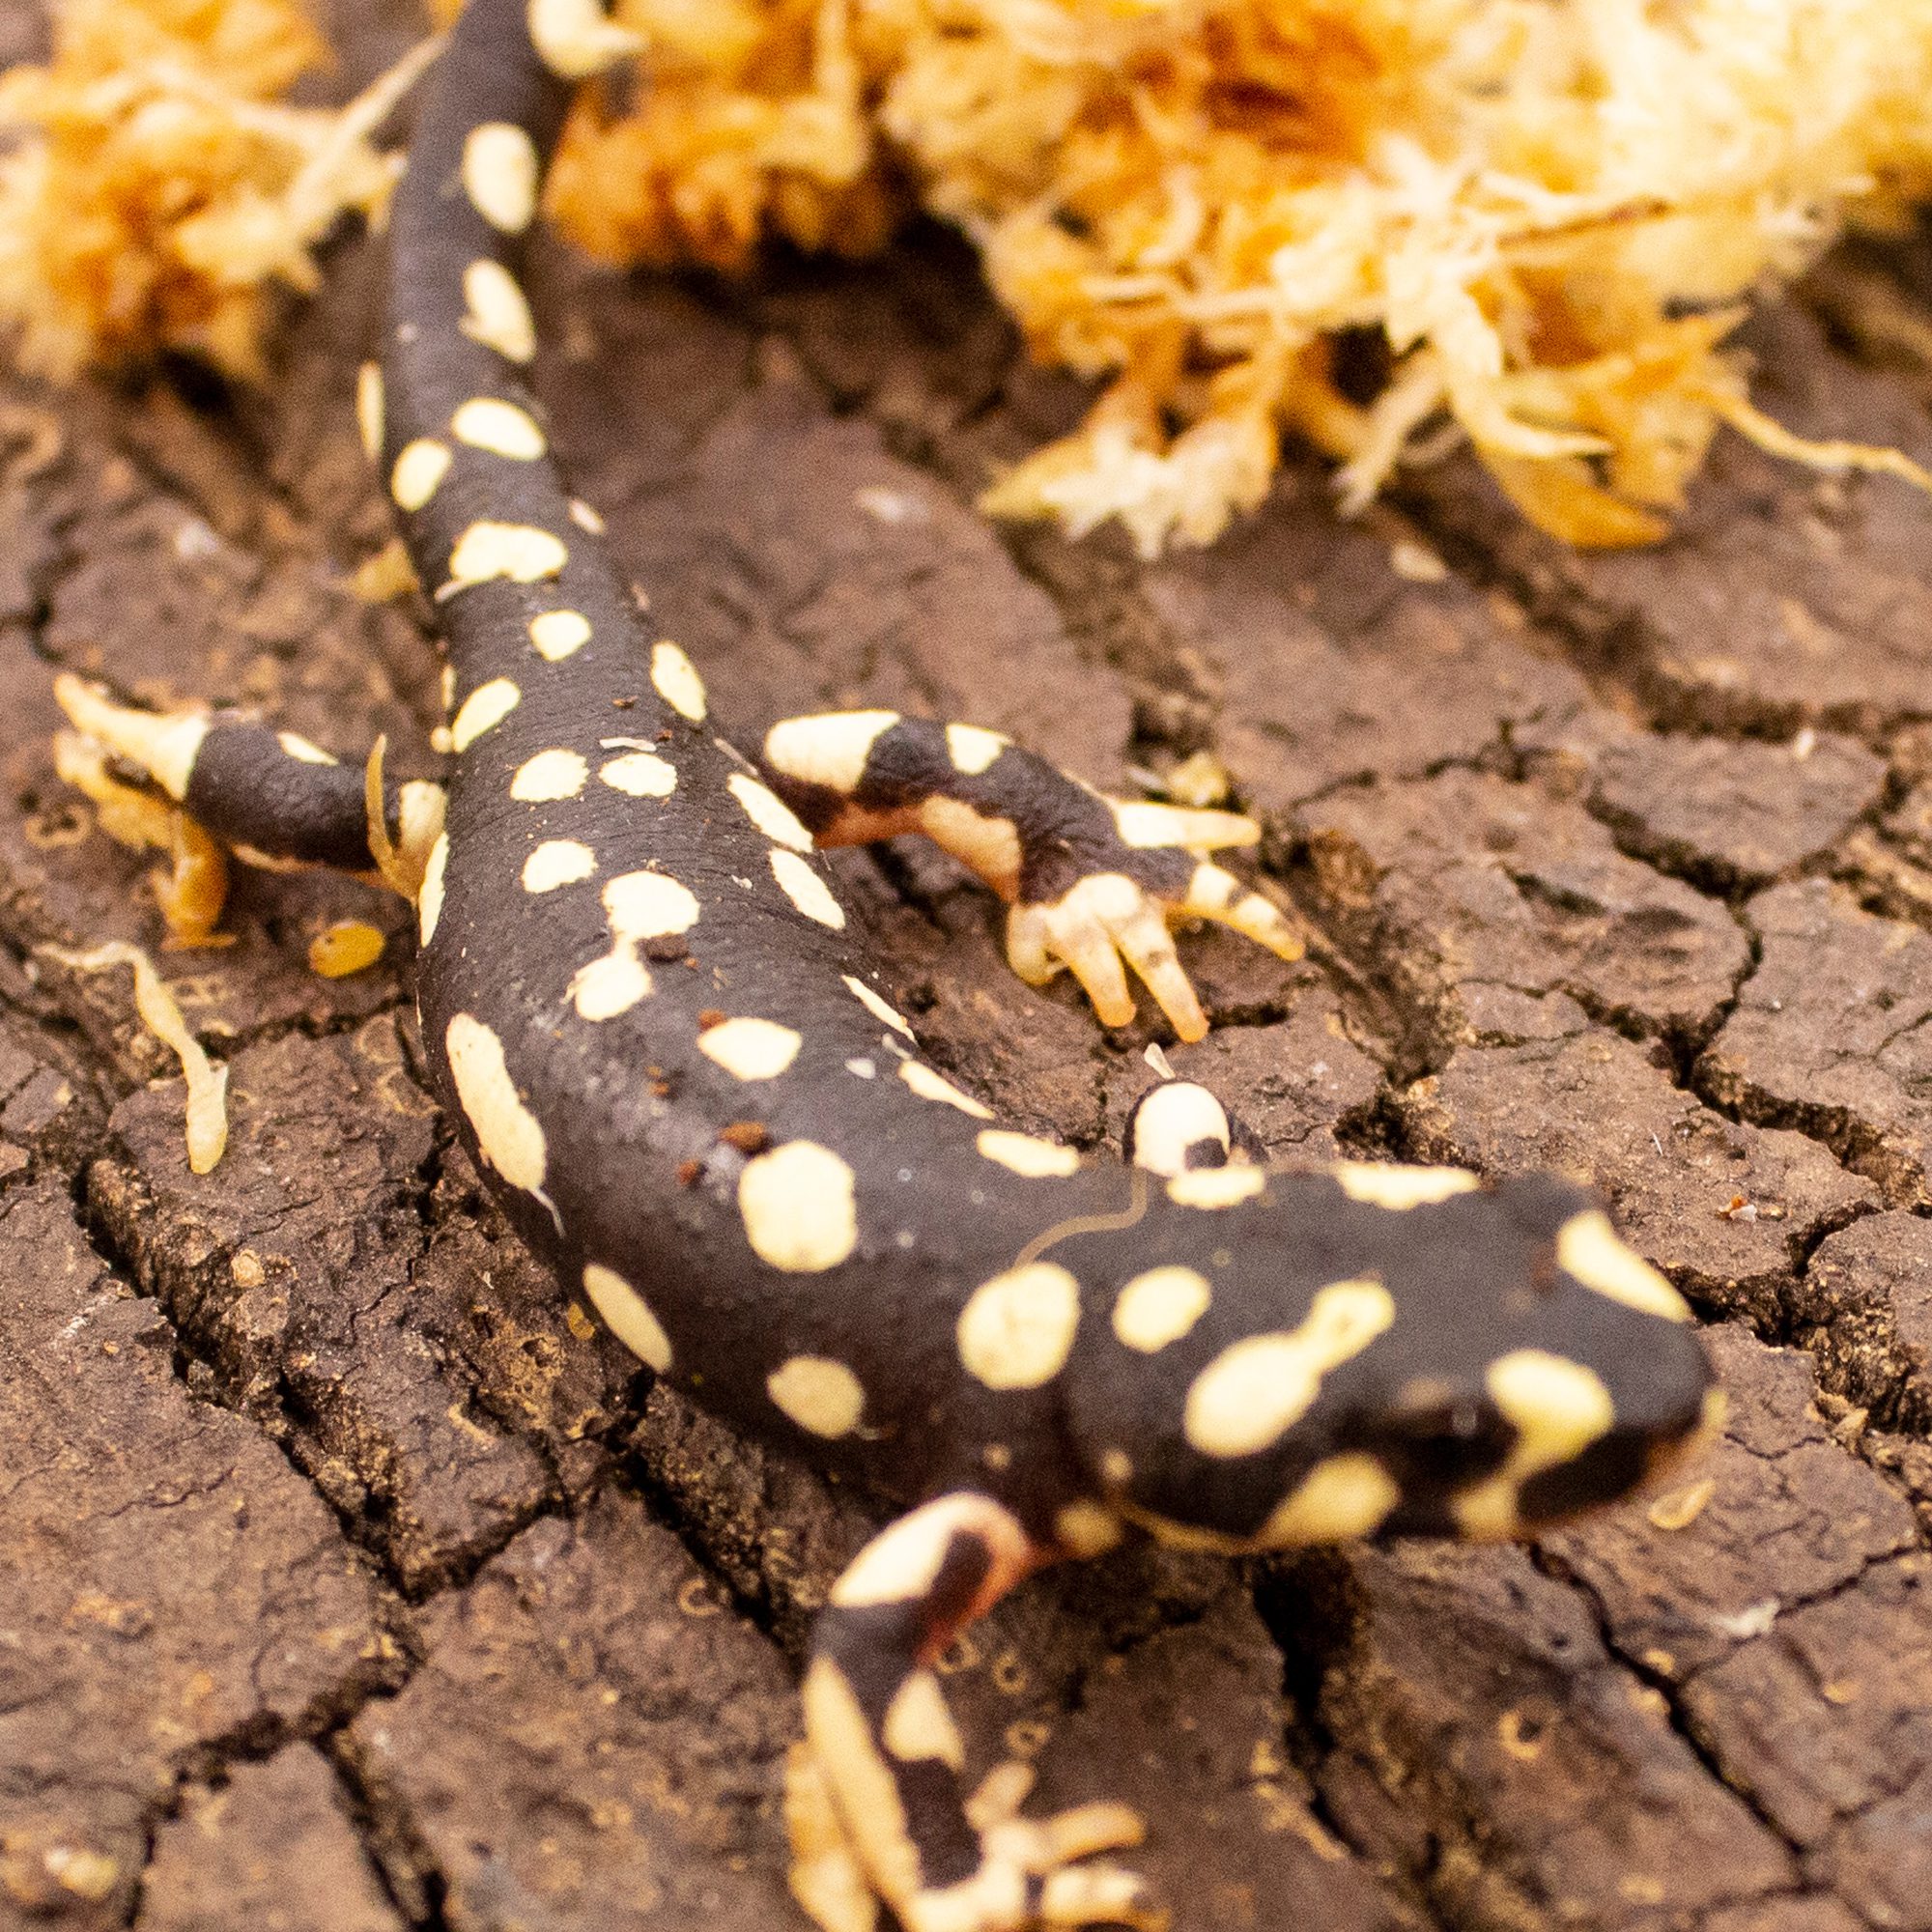 CB Yellow Spotted Newt